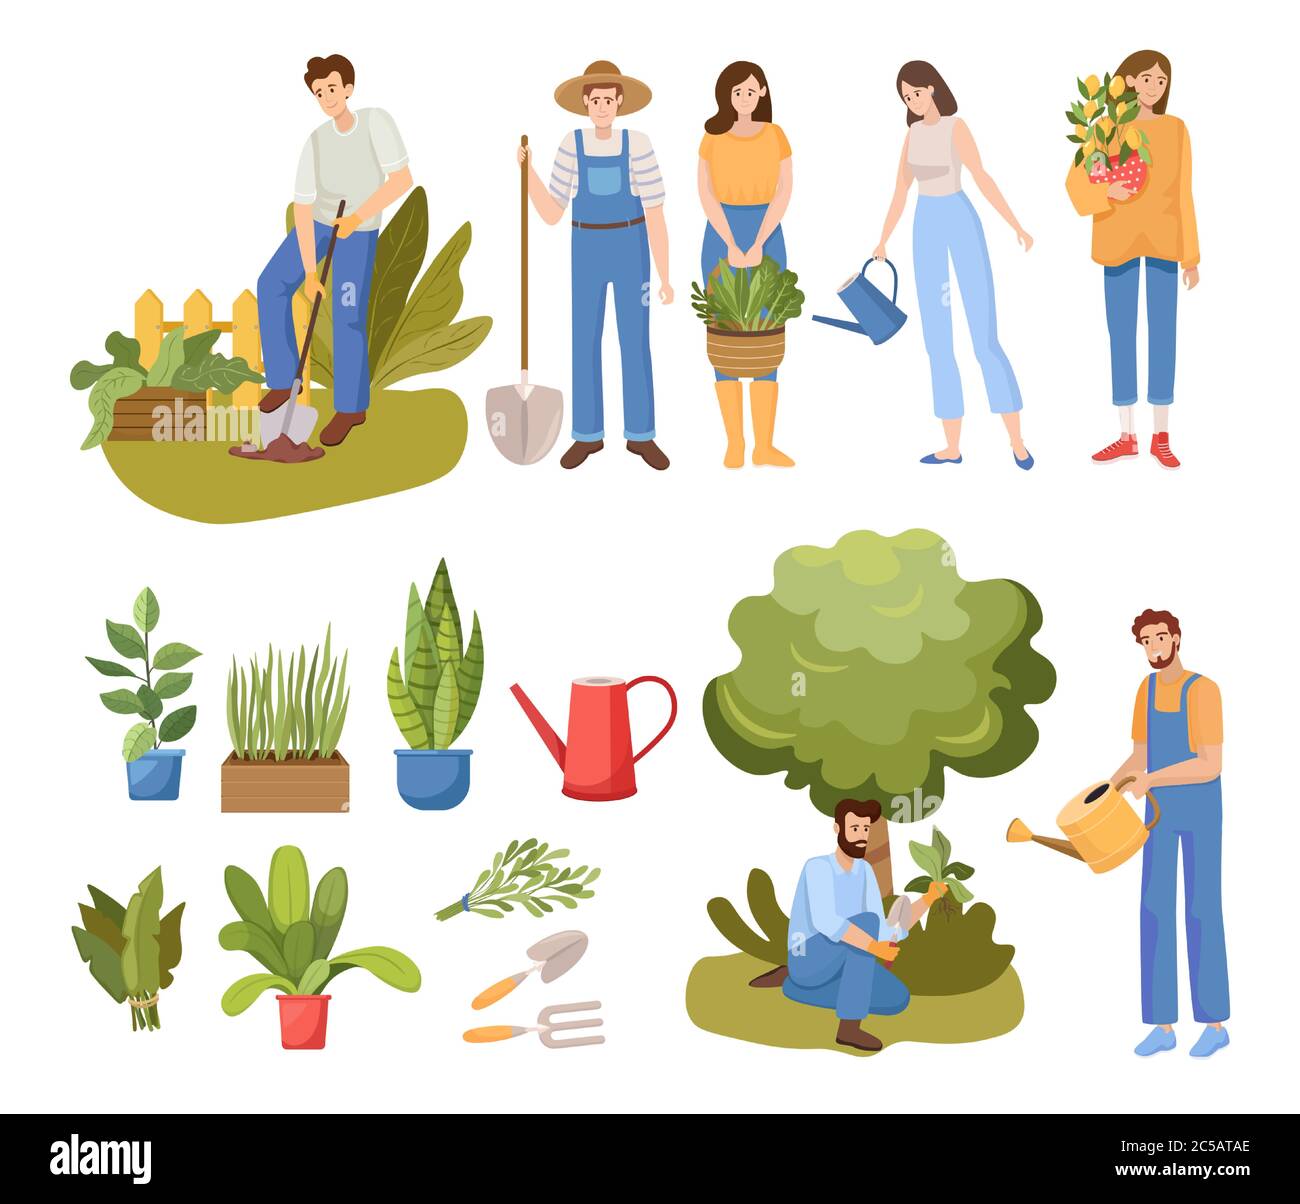 People gardening vector flat illustration. Men and women watering plants and digging the garden, growing flowers and vegetables. Agriculture gardener hobby and garden job concept. Stock Vector